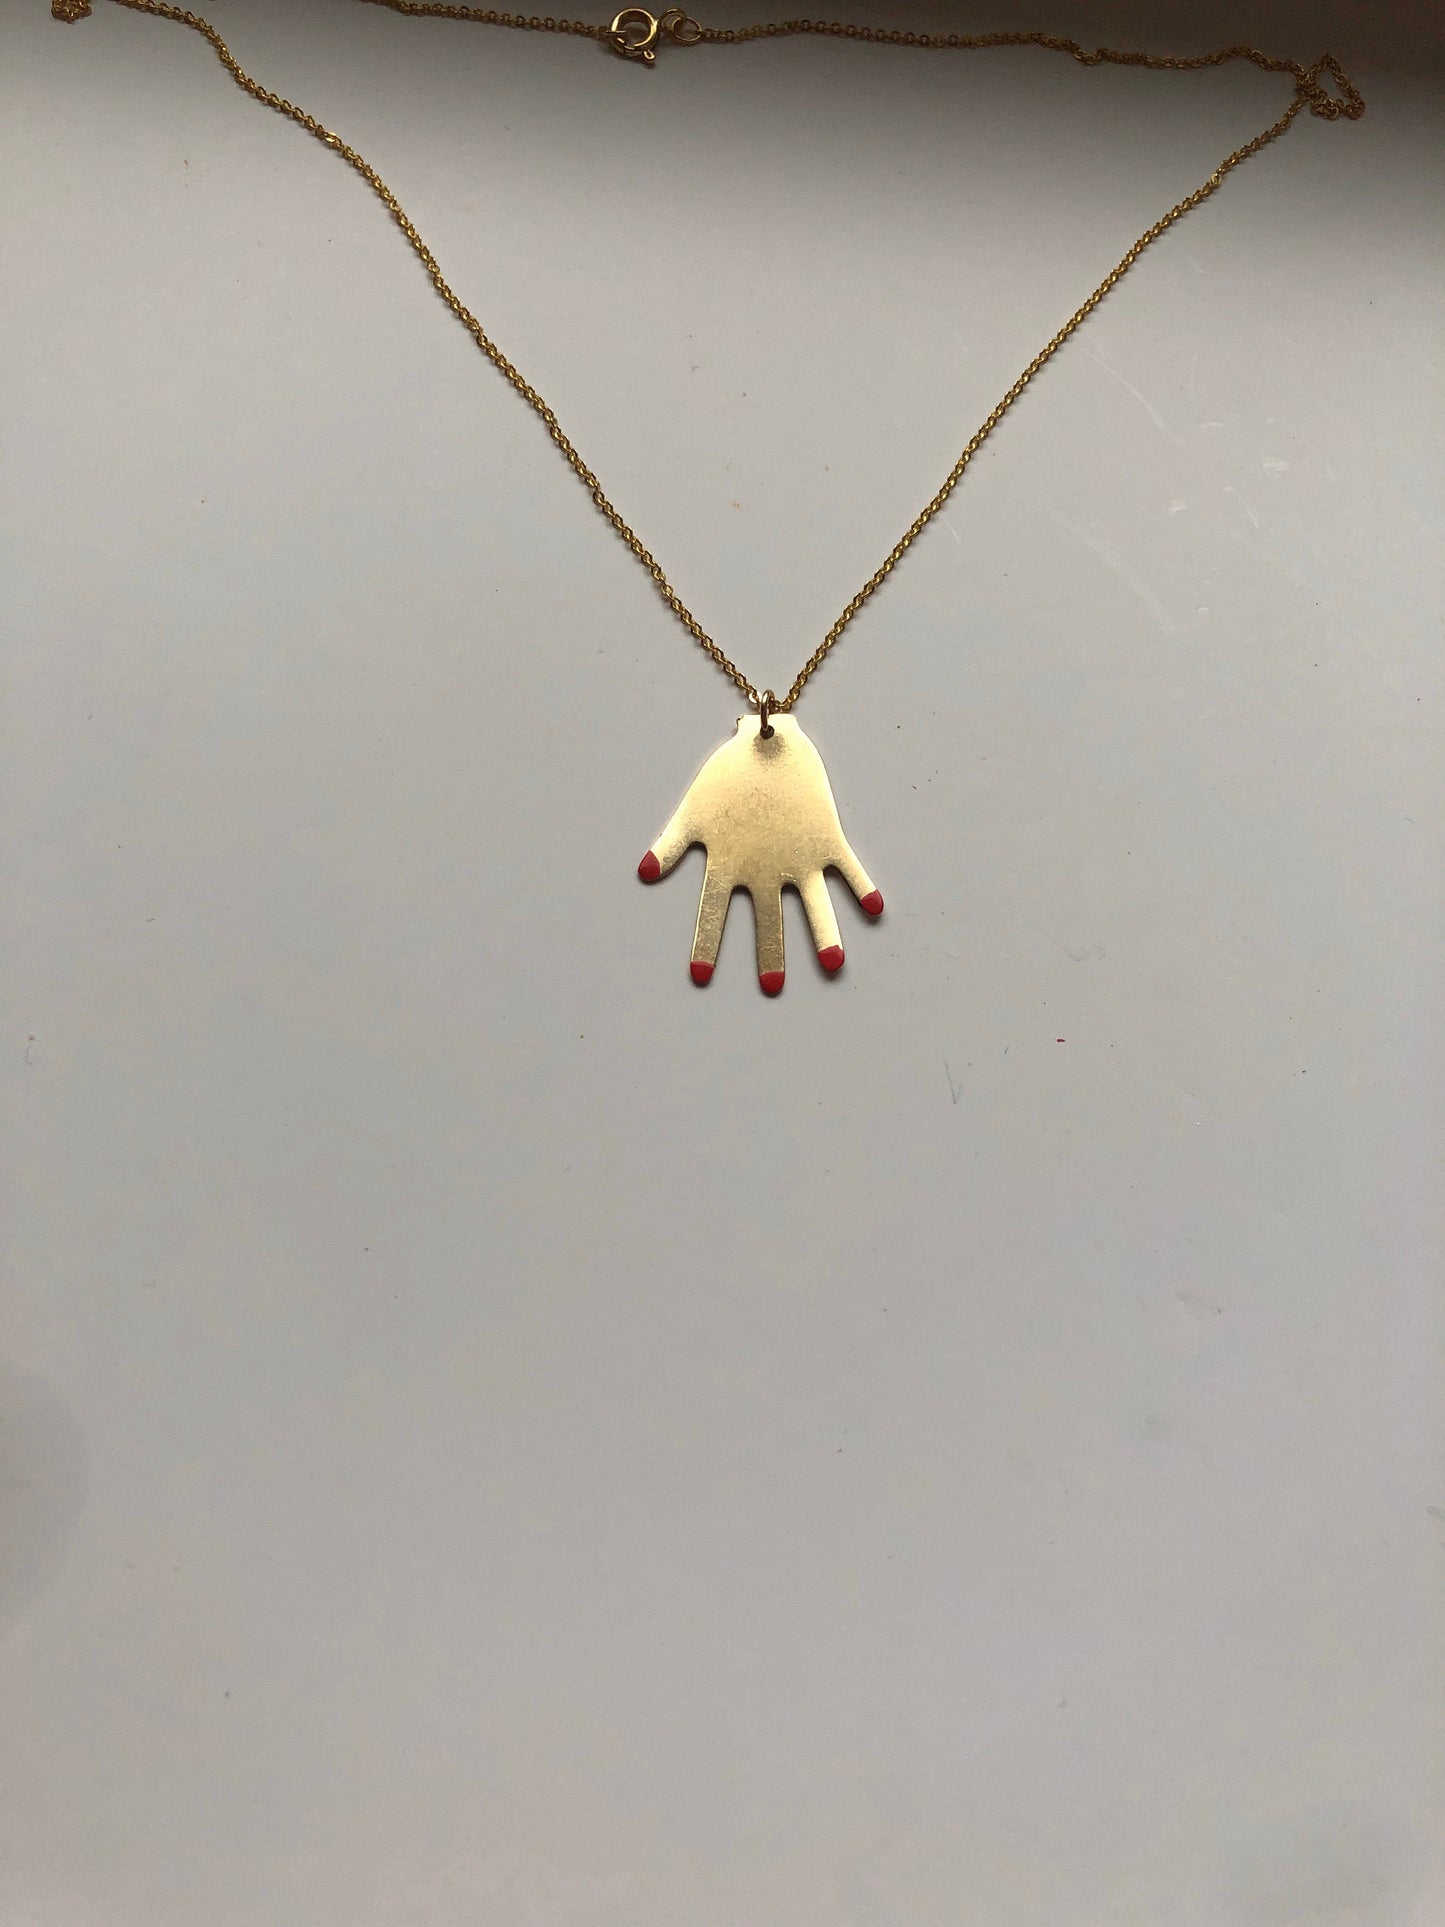 Manicured Hand Necklace - Gold Plated Hand Necklace with Red Painted Nails on 18" Gold-Filled Chain